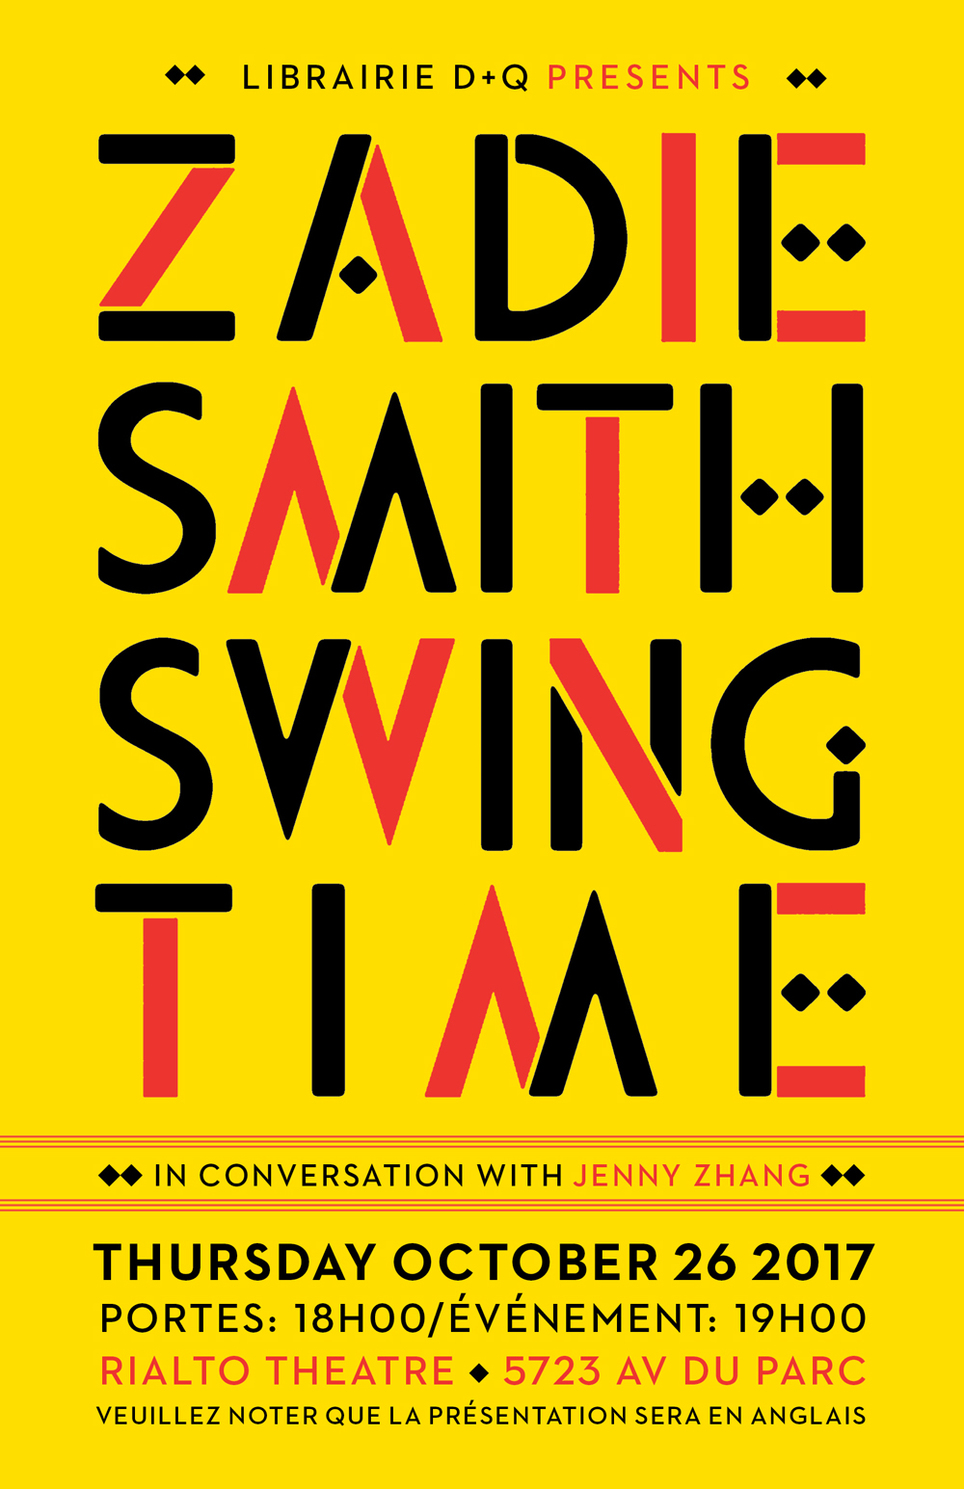 *TONIGHT* Thursday October 26th : Zadie Smith in conversation with Jenny Zhang